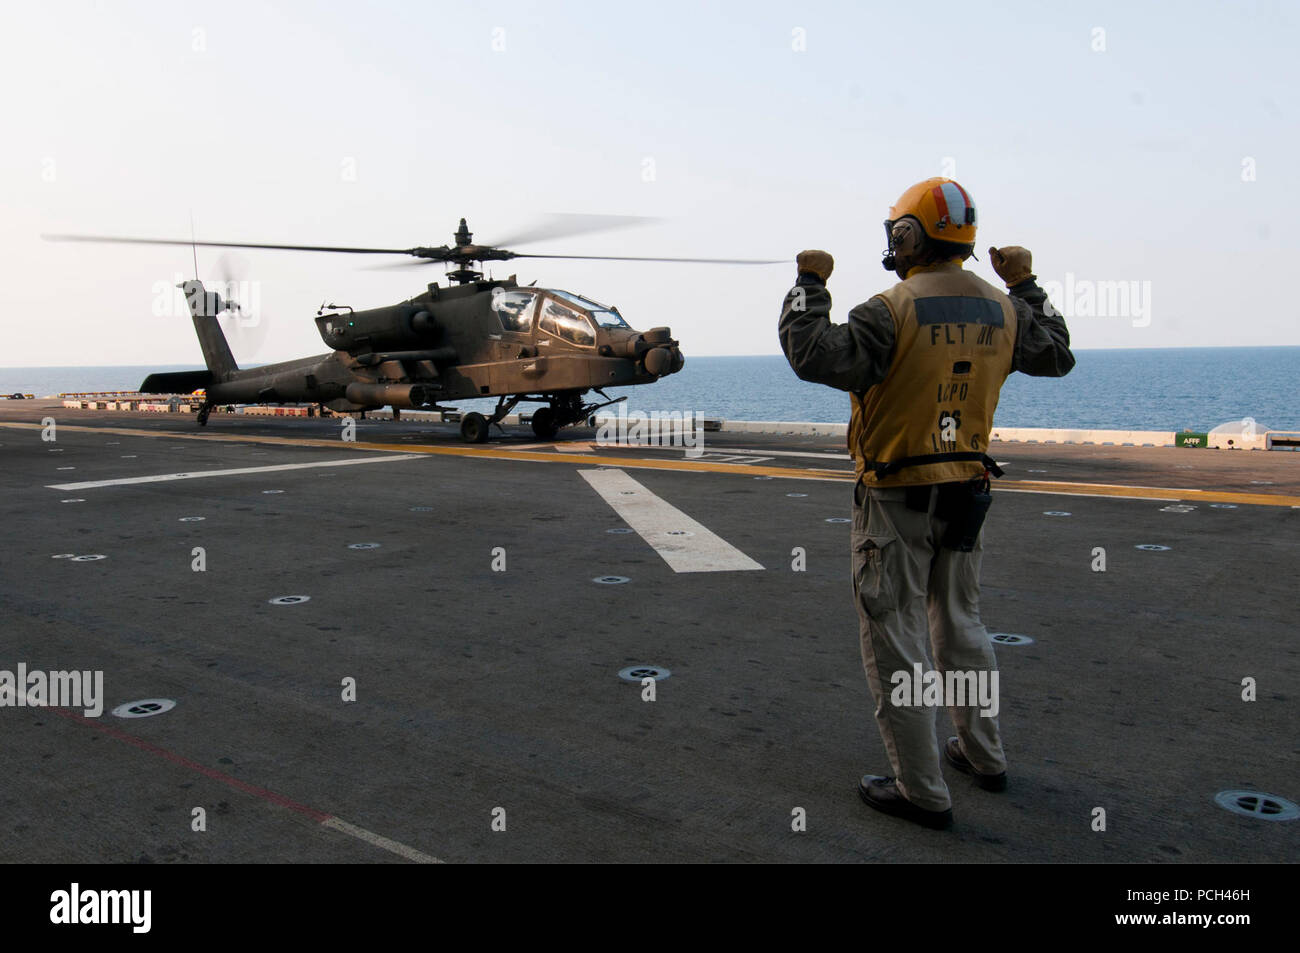 A U.S. Sailor directs the pilots of an Army AH-64D Apache Longbow helicopter assigned to the 4th Aerial Reconnaissance Battalion, 2nd Combat Aviation Brigade, 2nd Infantry Division to land aboard the amphibious assault ship USS Bonhomme Richard (LHD 6) in the East China Sea April 11, 2014. The Bonhomme Richard was underway in the U.S. 7th Fleet area of responsibility supporting maritime security operations and theater security cooperation efforts. Stock Photo